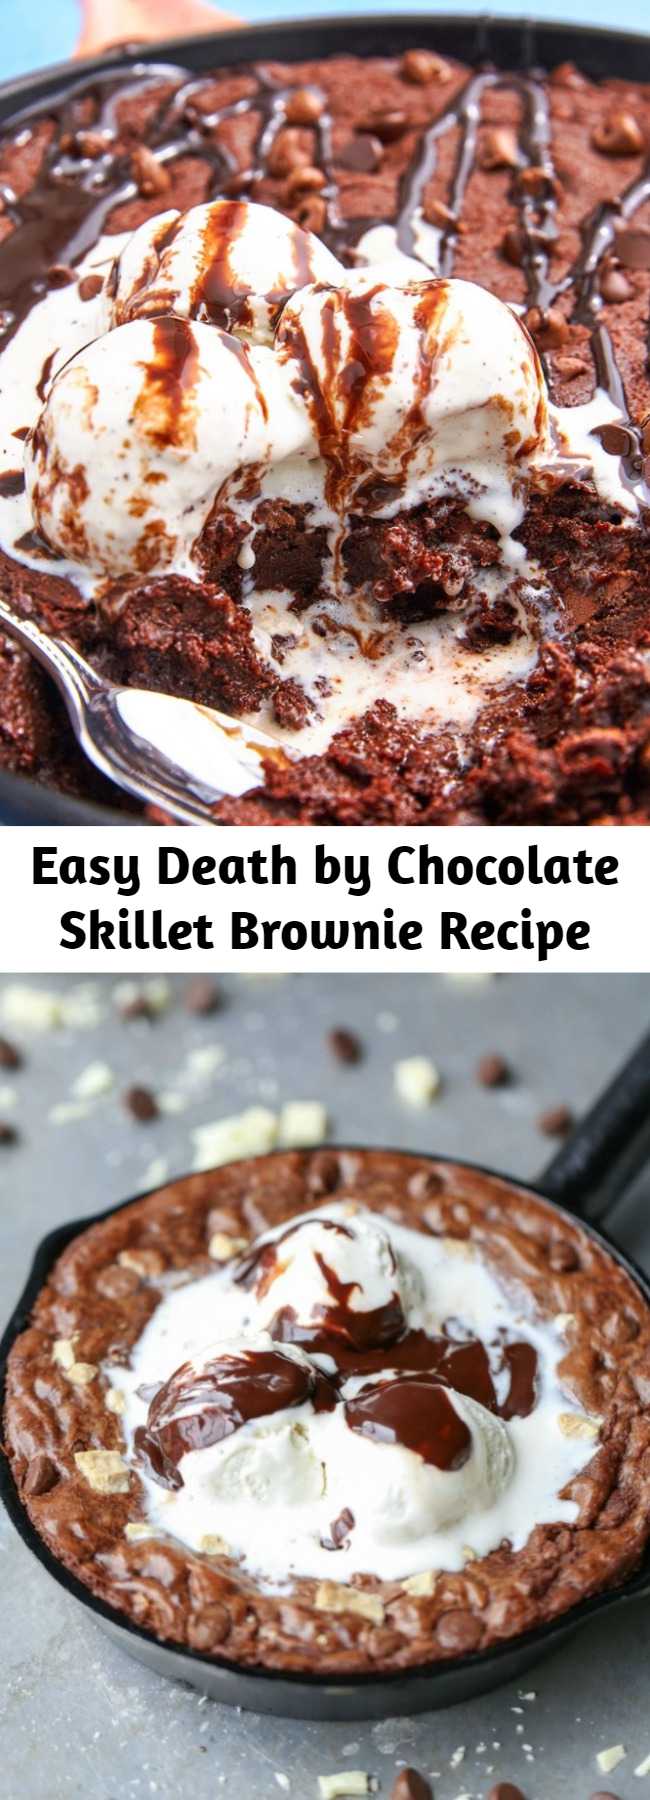 Easy Death by Chocolate Skillet Brownie Recipe - Upgrade your Valentine's Day with this luscious Triple-Chocolate Skillet Brownie recipe. This brownie uses only enough flour to hold it all together, keeping the center super-rich and fudgy.